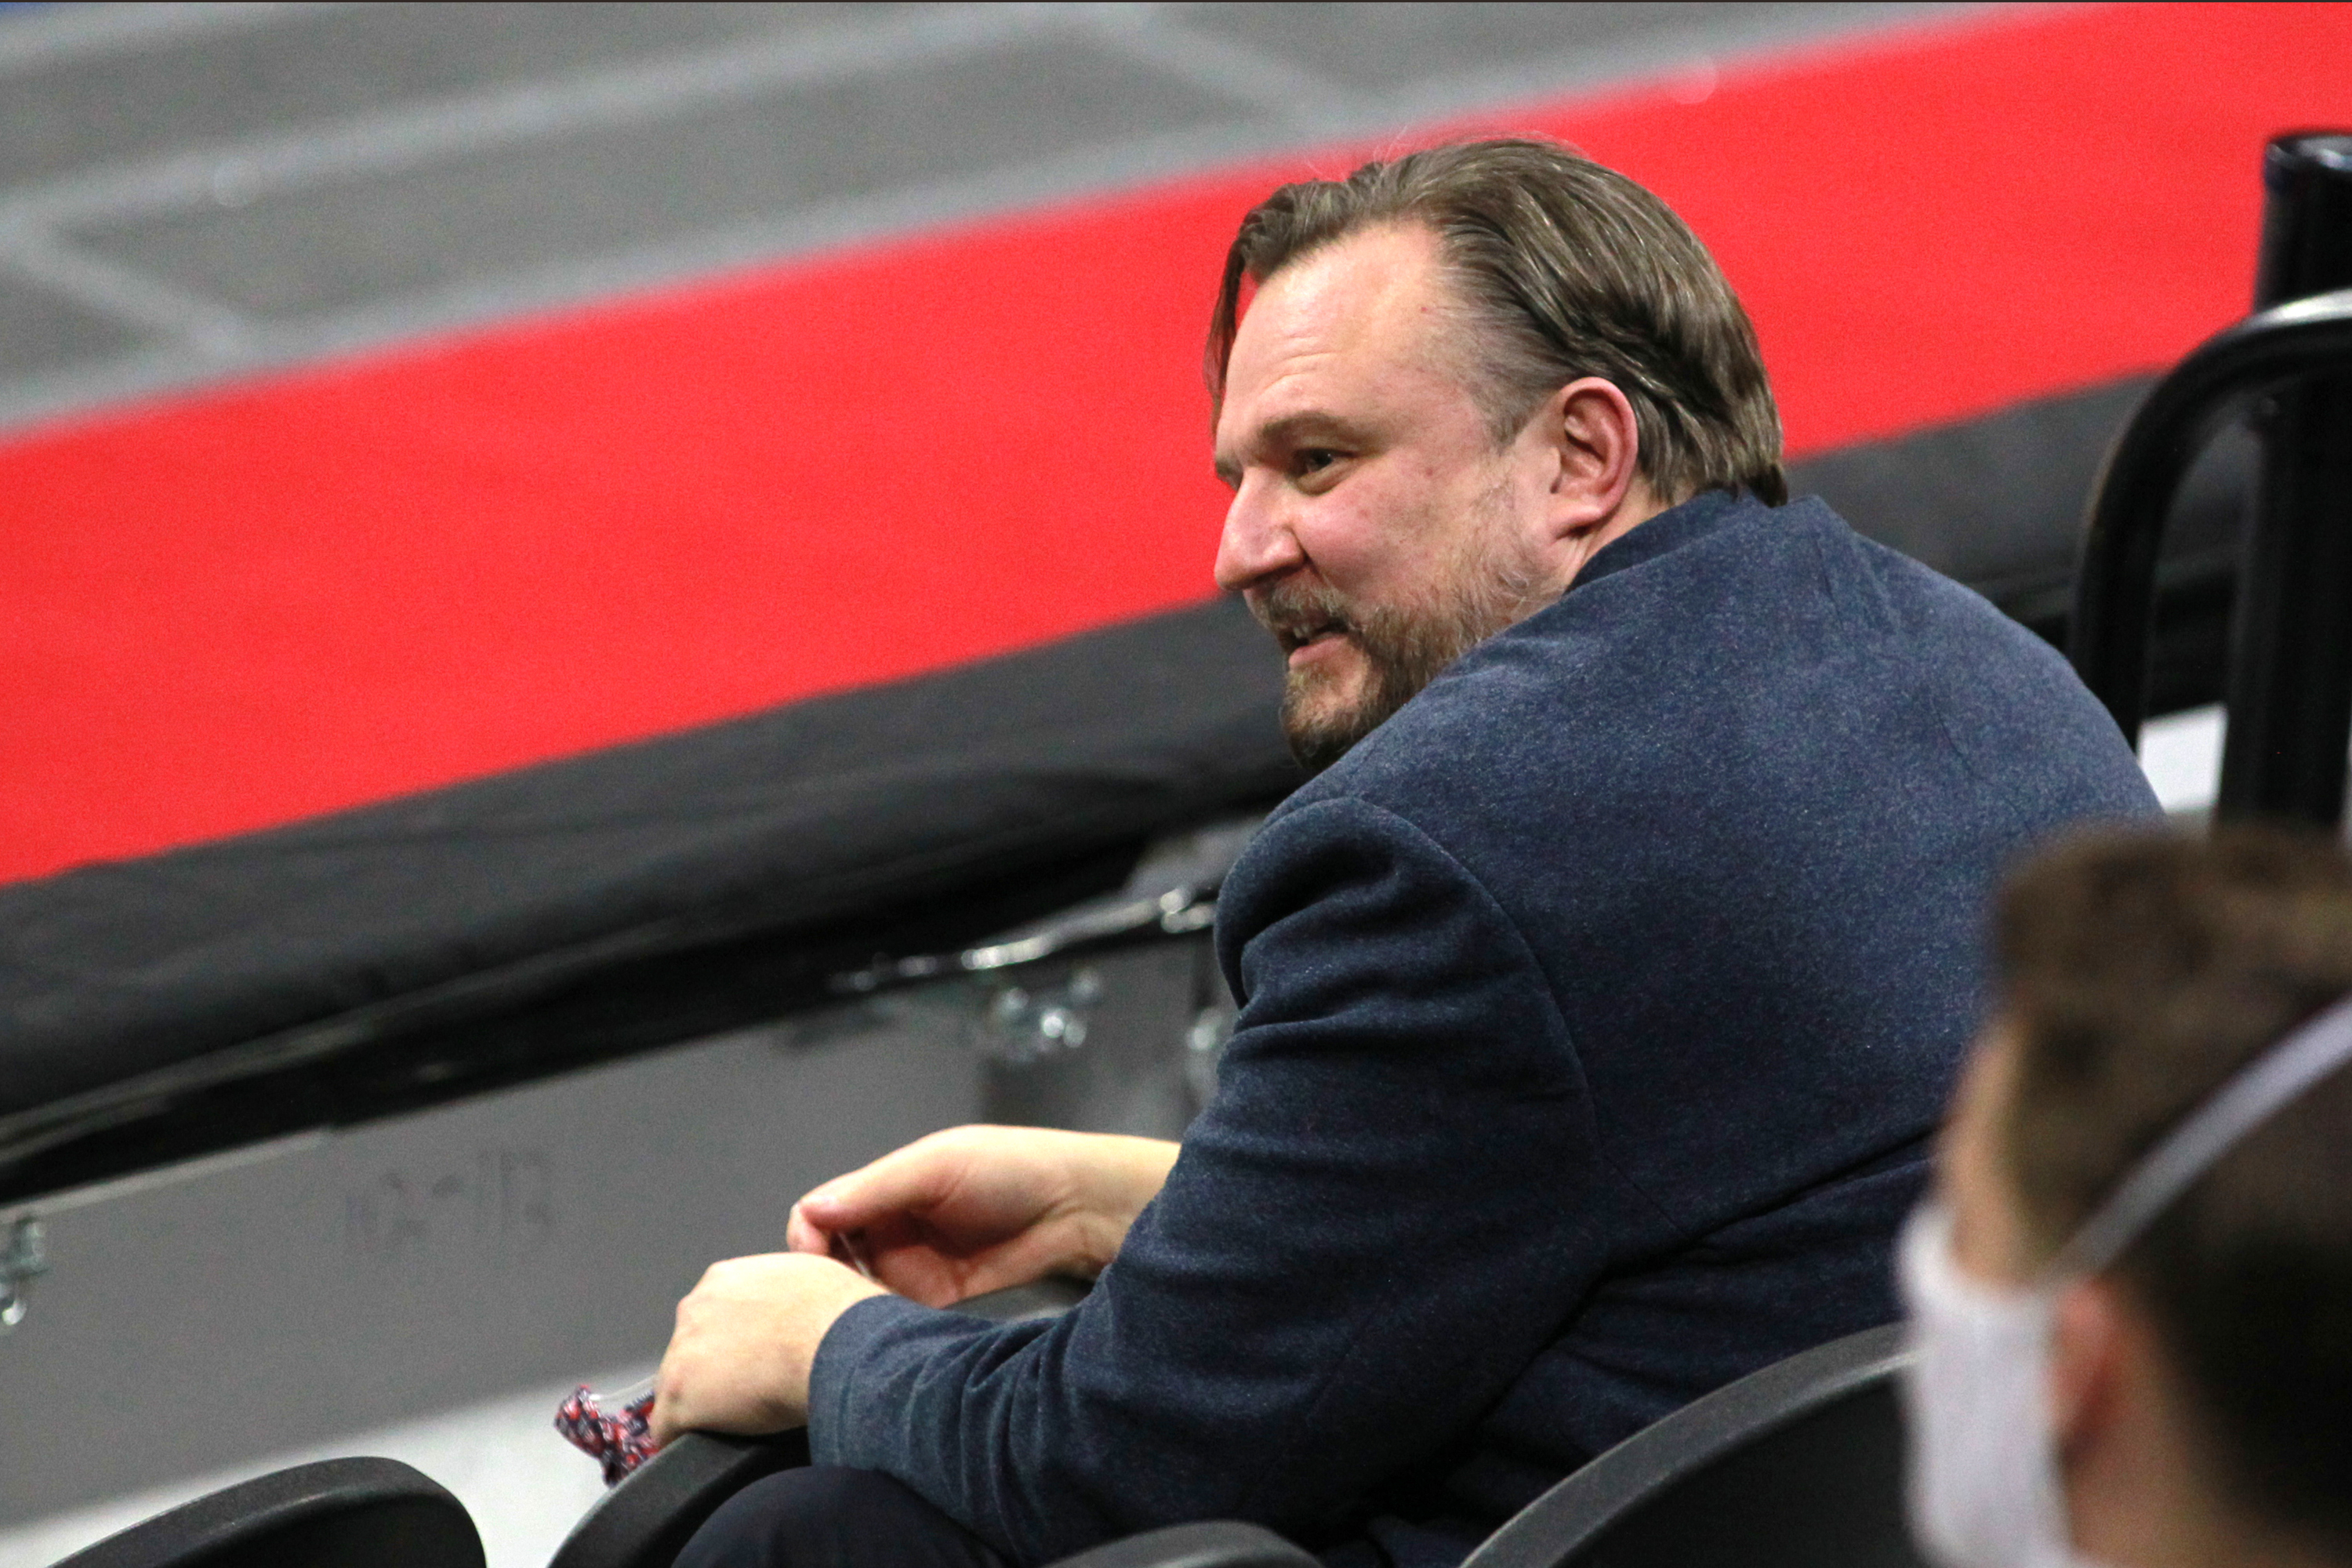 Daryl morey crypto dca most secure crypto currency wiki